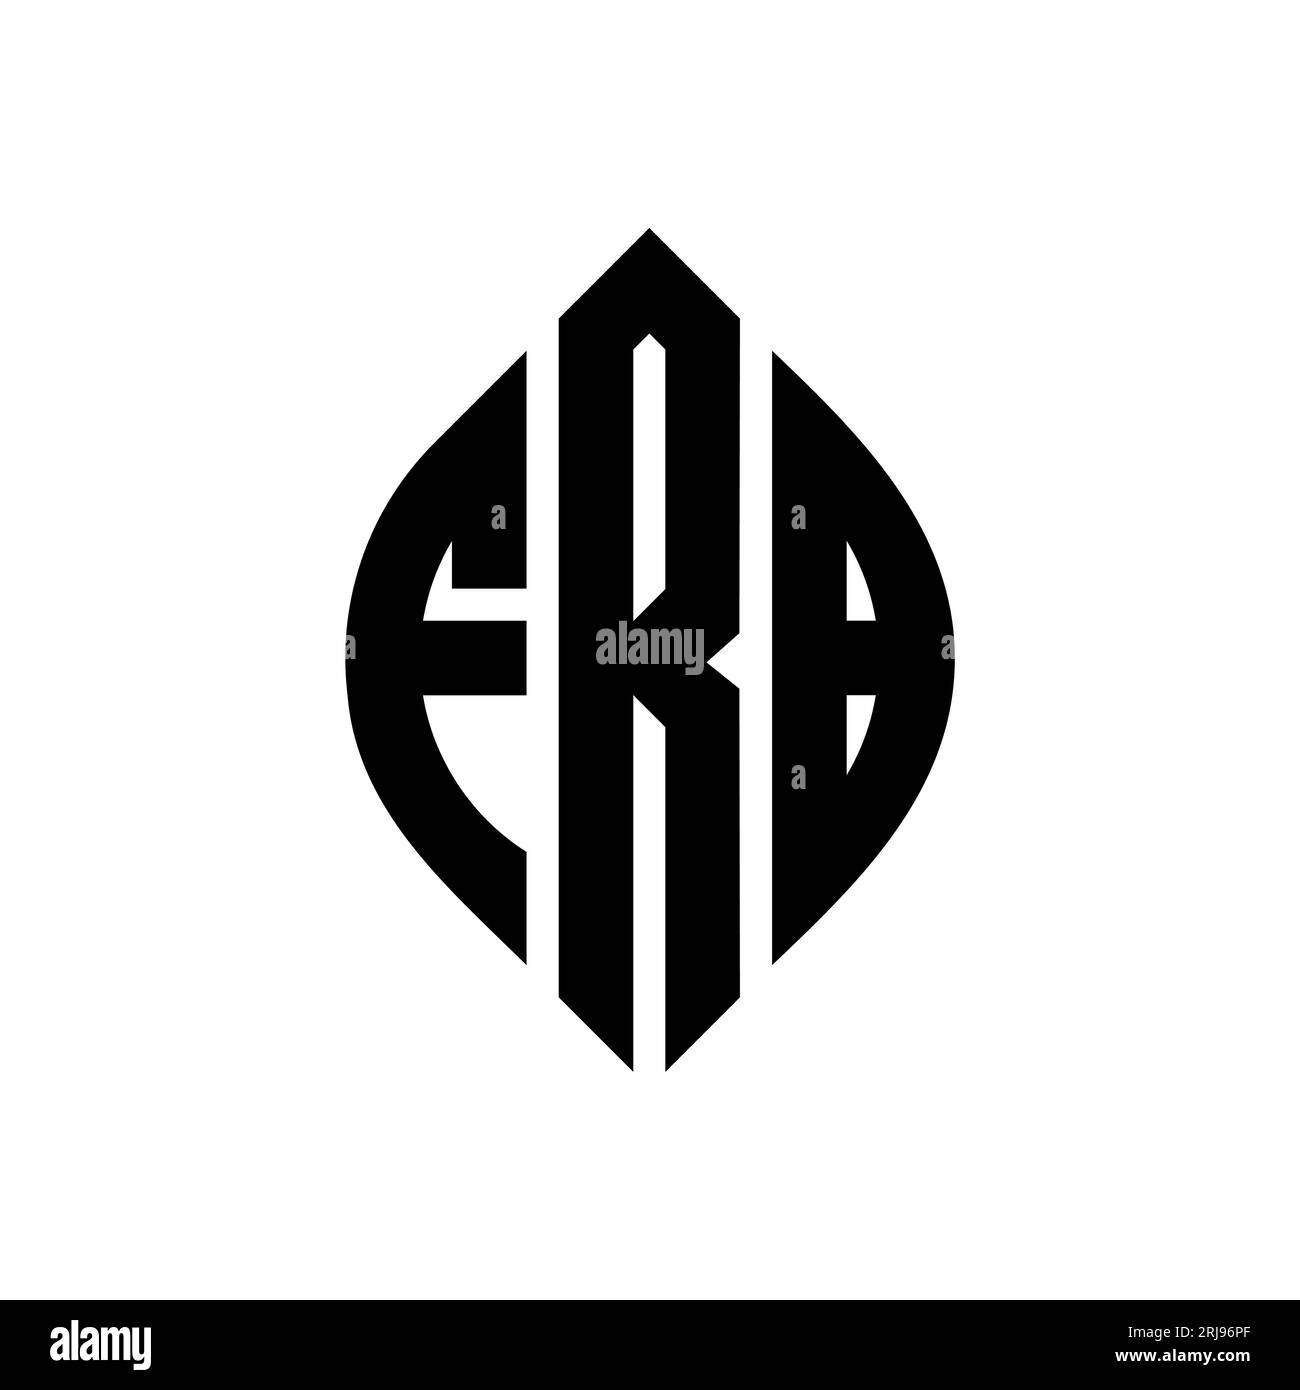 FRB circle letter logo design with circle and ellipse shape. FRB ellipse letters with typographic style. The three initials form a circle logo. FRB Ci Stock Vector